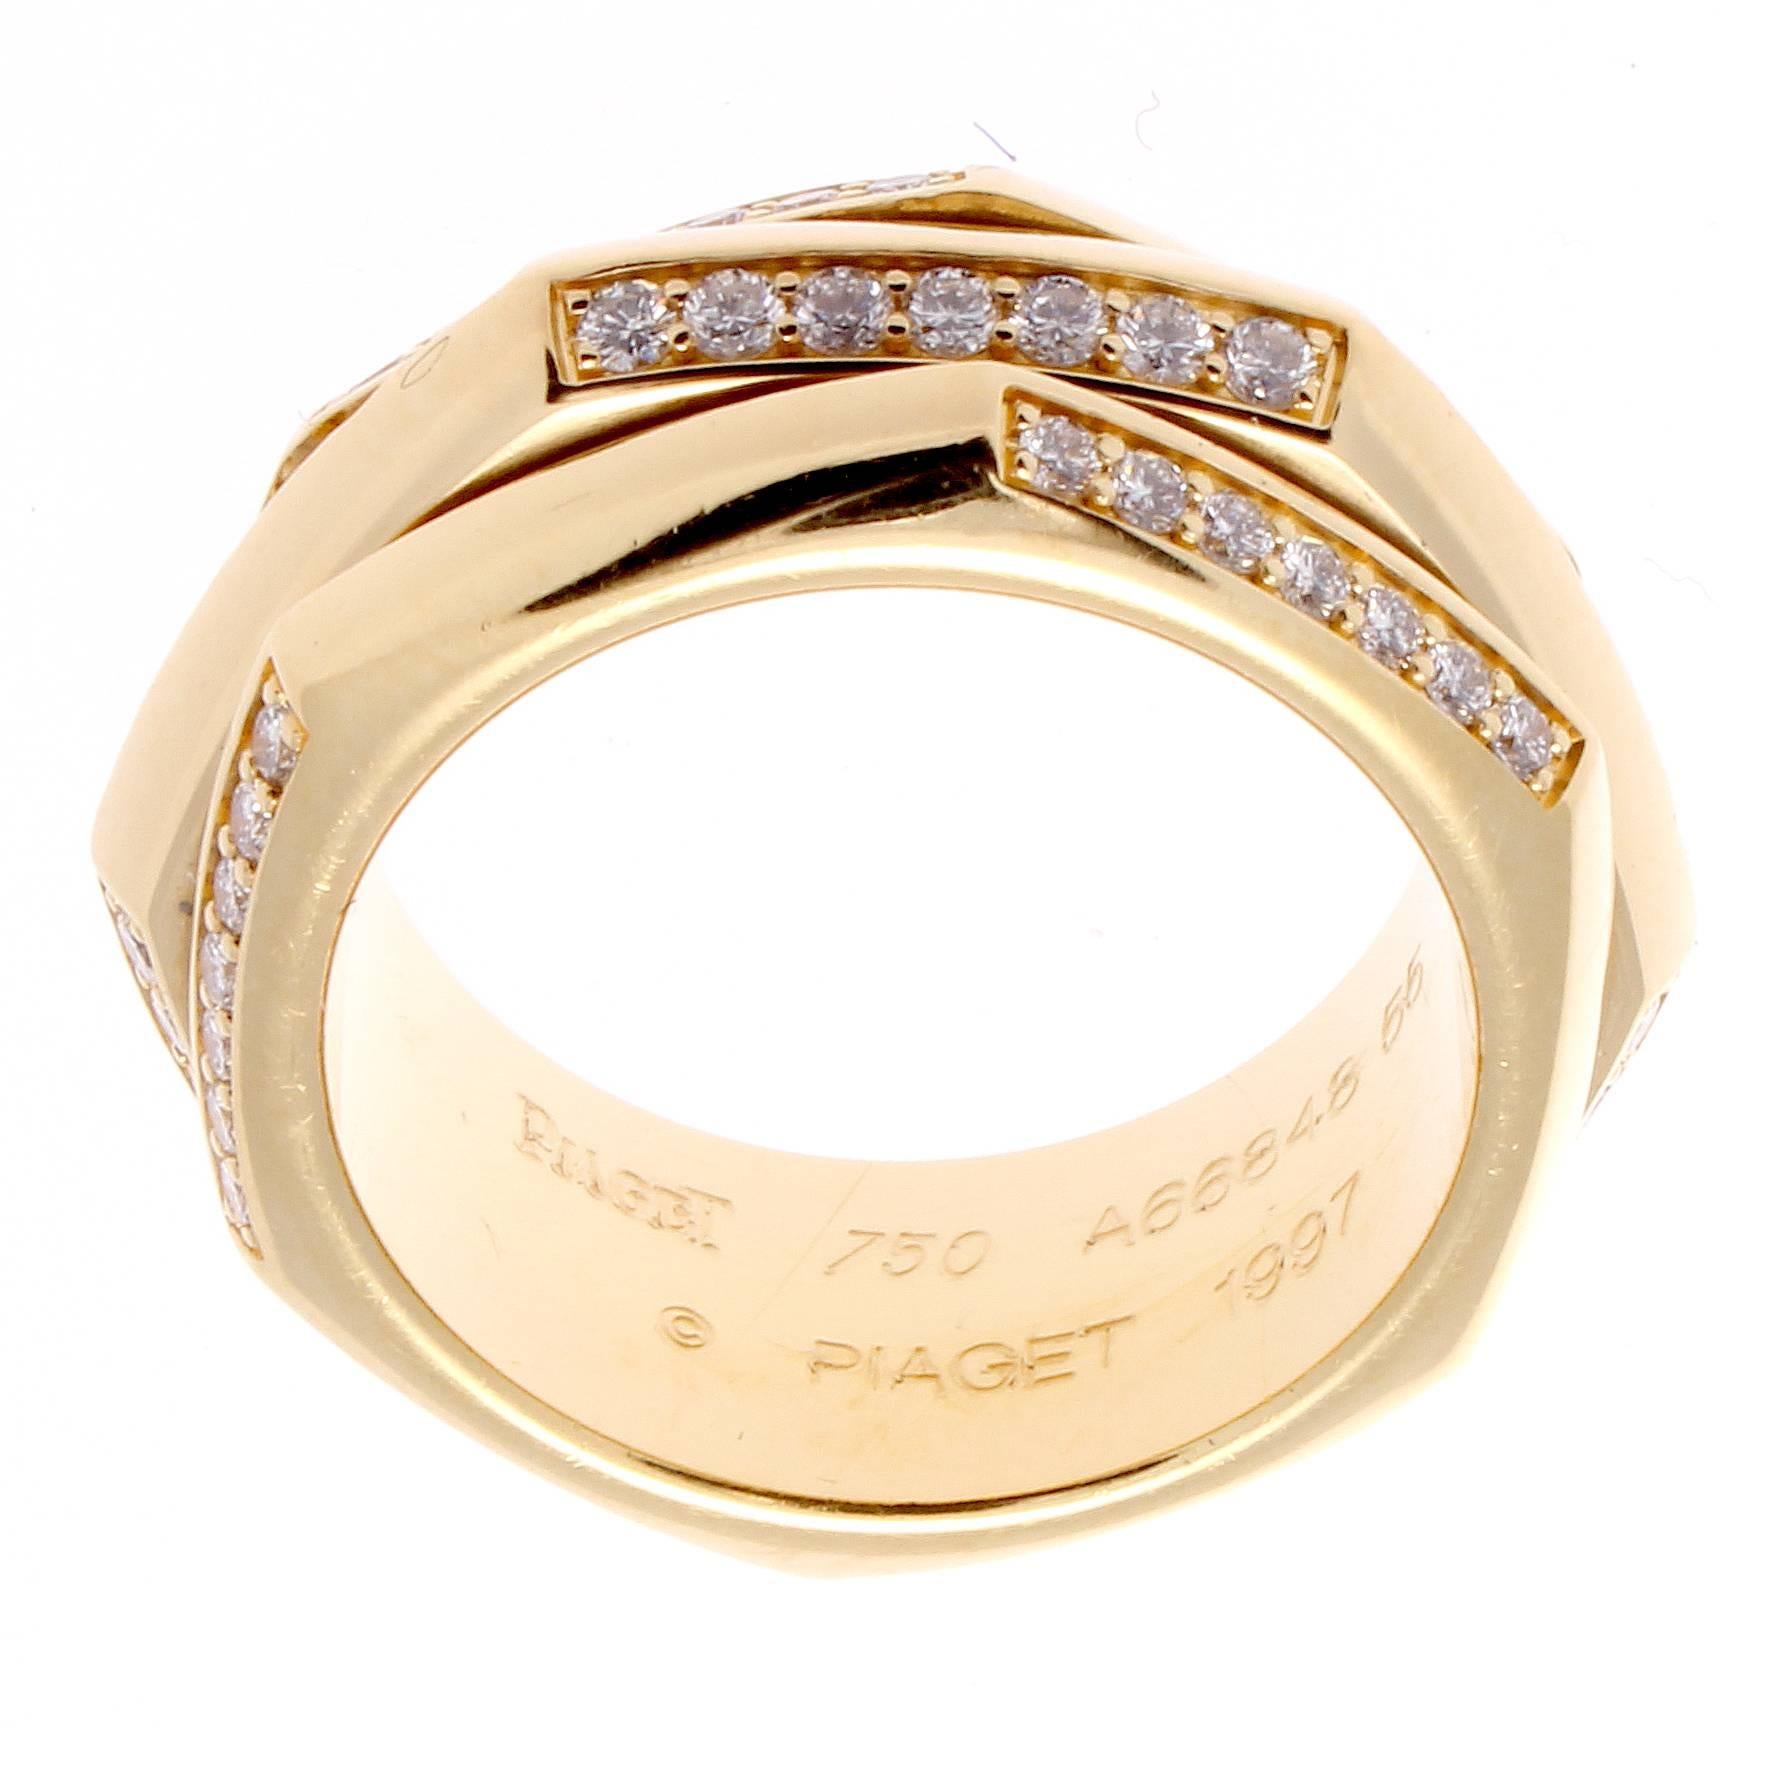 A very geometric aesthetic was the key to this design by Piaget. Combining 3 hexagonal rings that interchange rows of near colorless diamonds and smooth glistening yellow 18k gold with the middle ring creatively spinning freely to occupy any boring